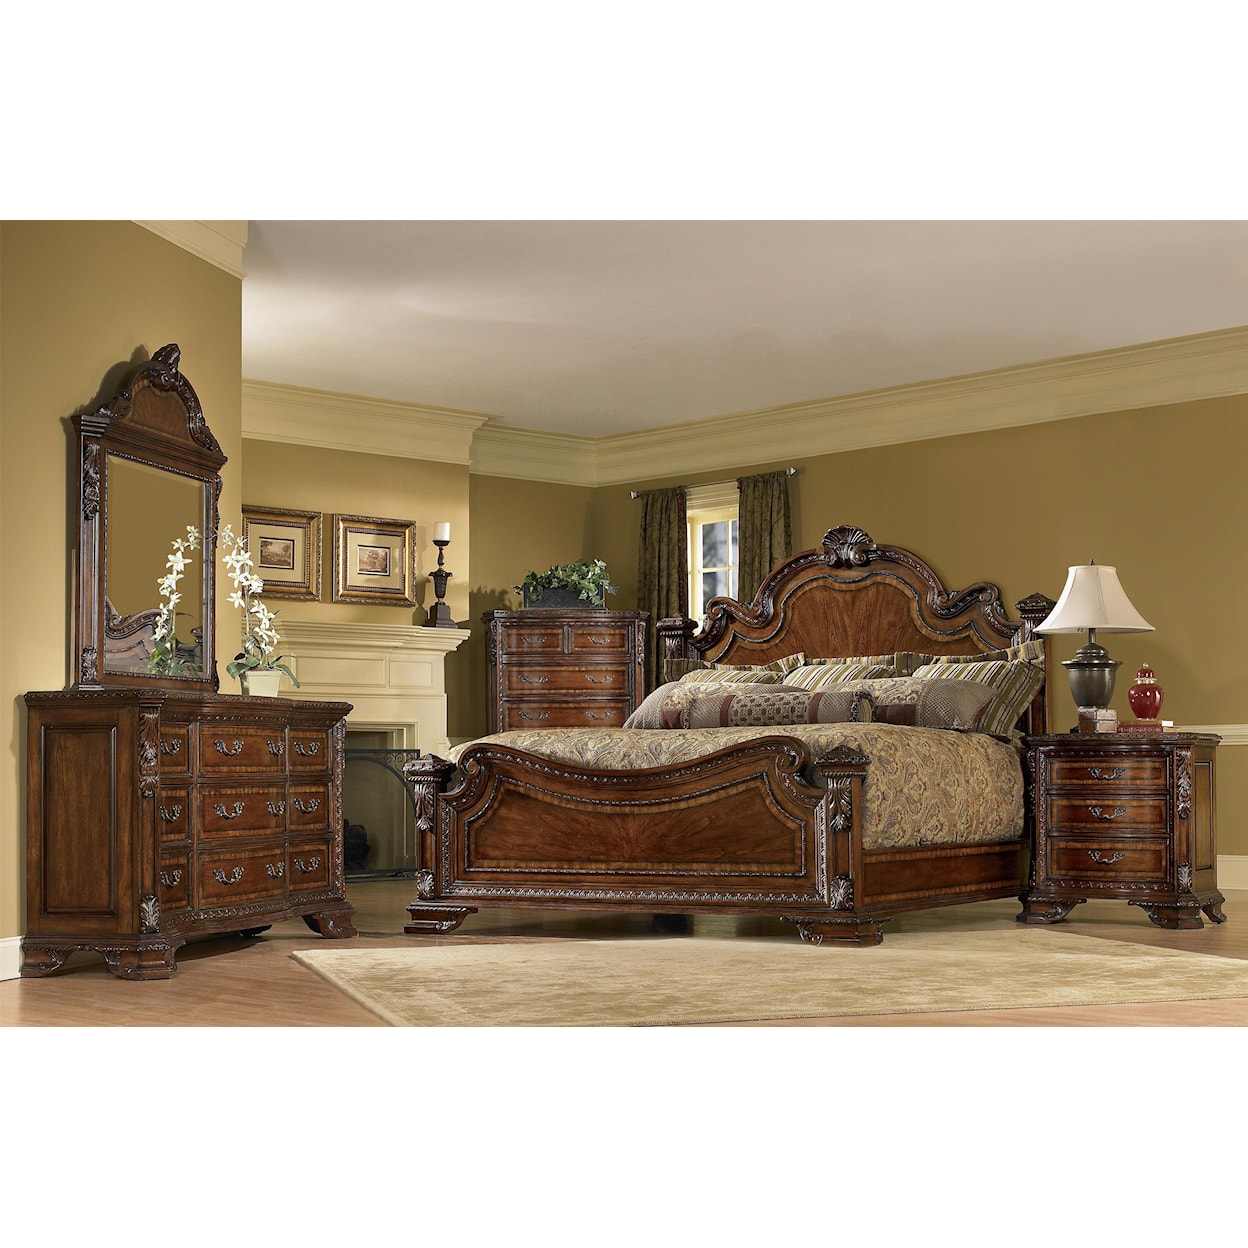 A.R.T. Furniture Inc Old World King Bedroom Group